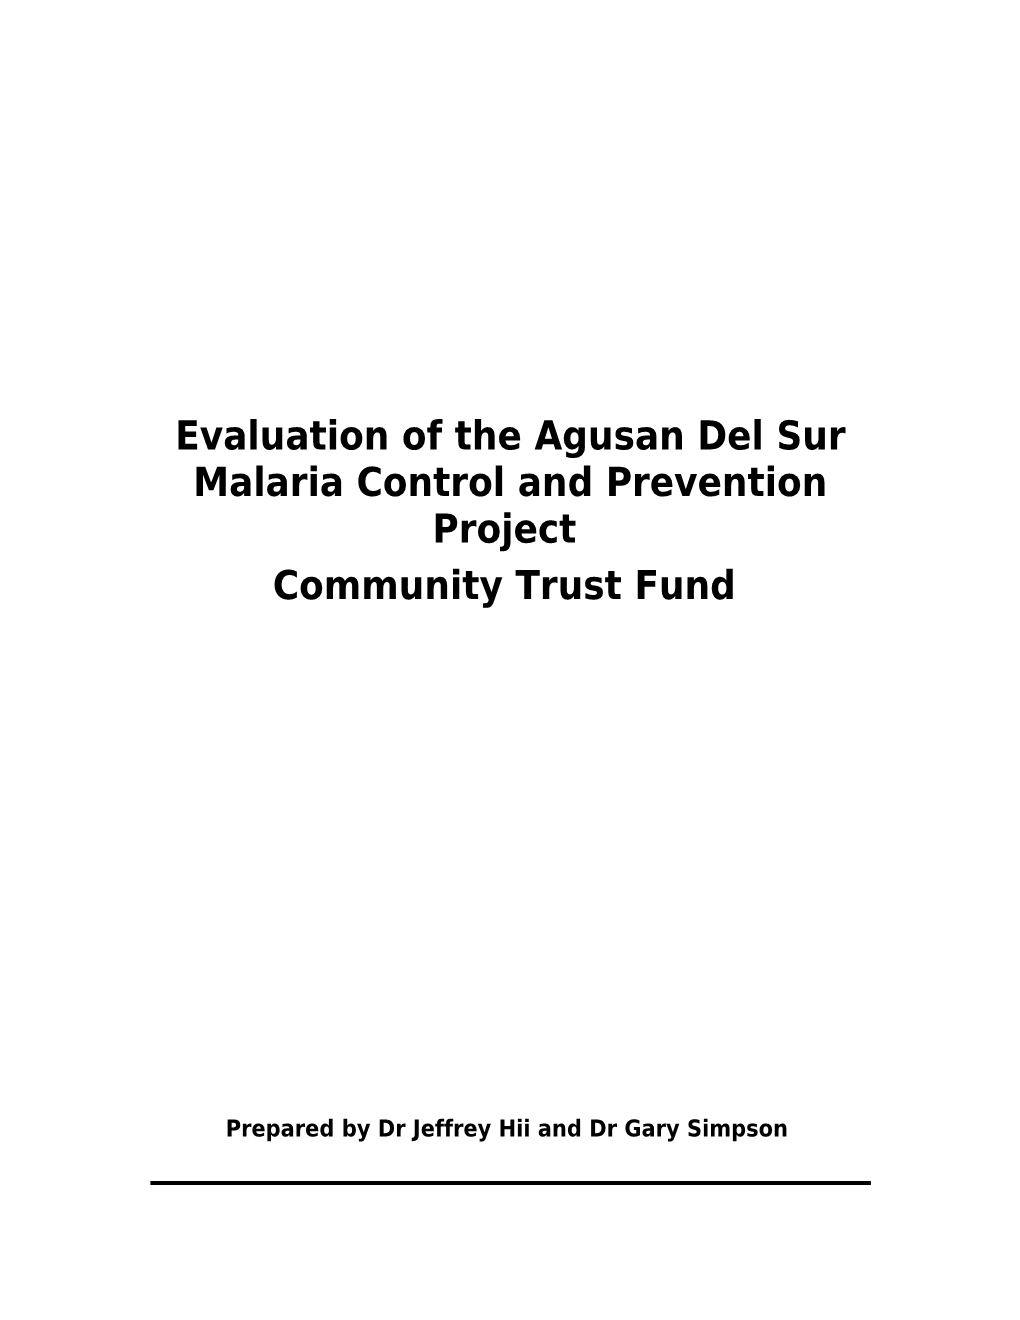 Evaluation of the Agusan Del Sur Malaria Control and Prevention Project